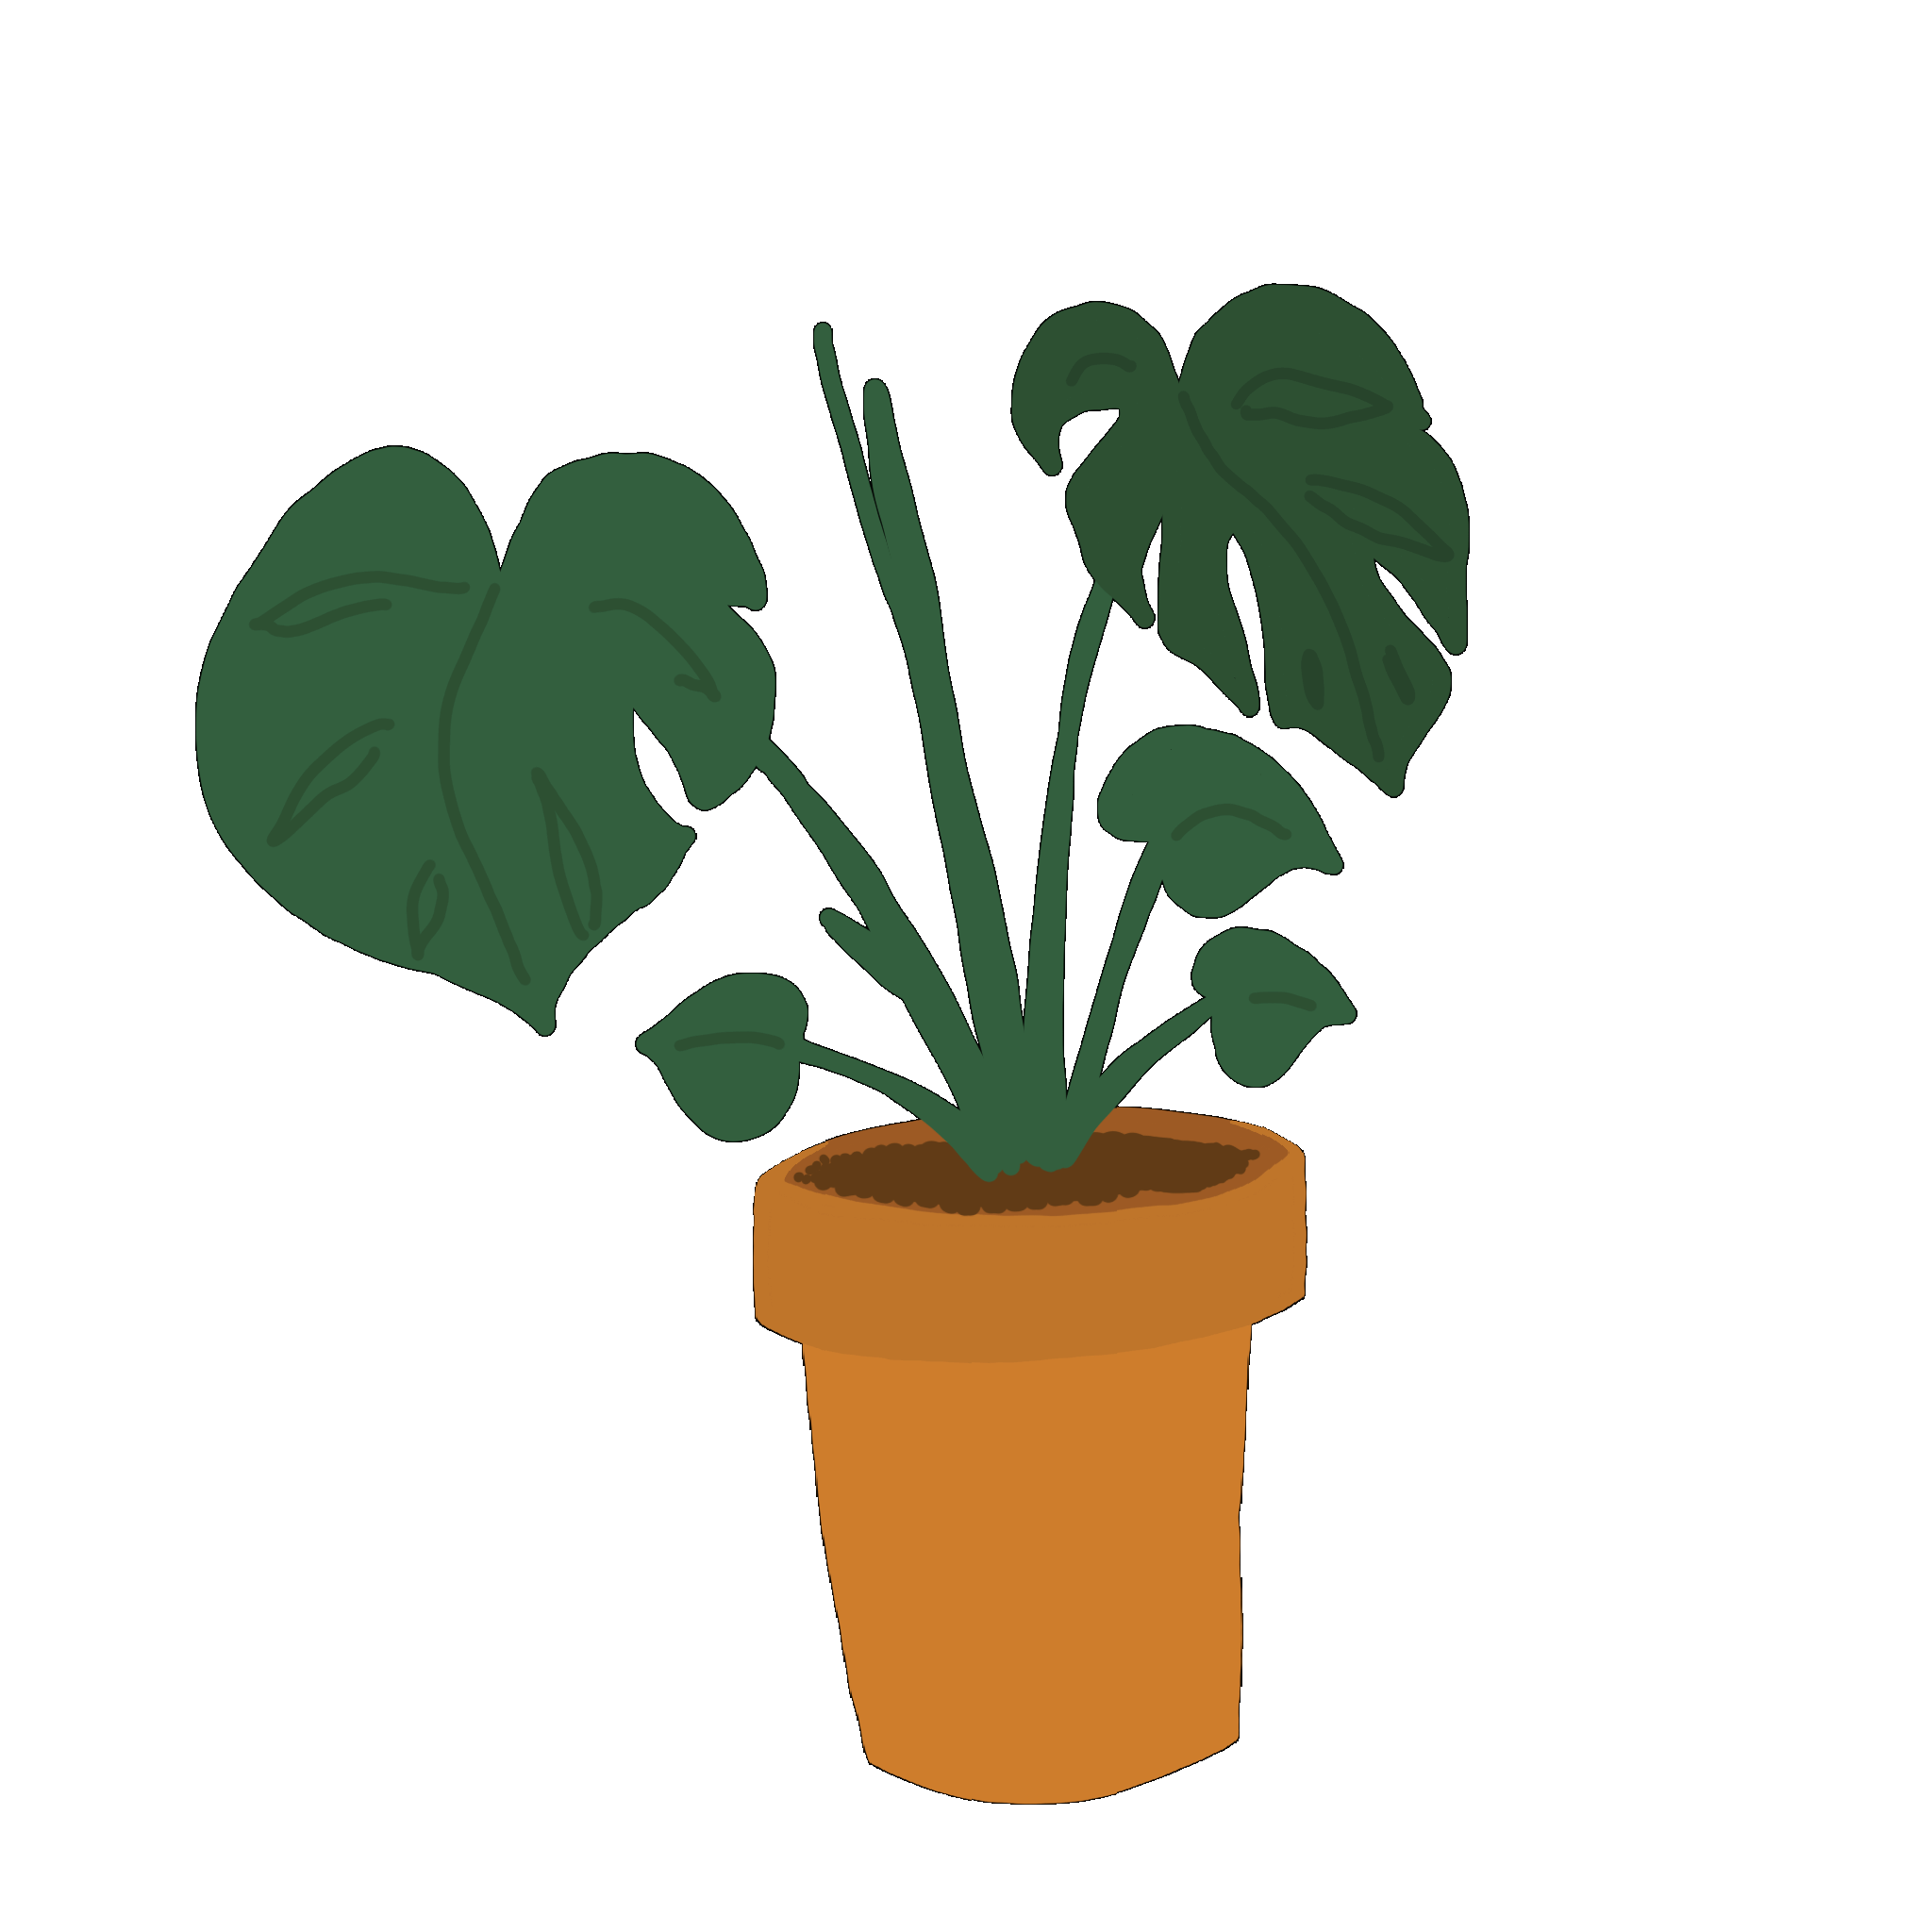 Plants Sticker by zartmintdesign for iOS & Android | GIPHY